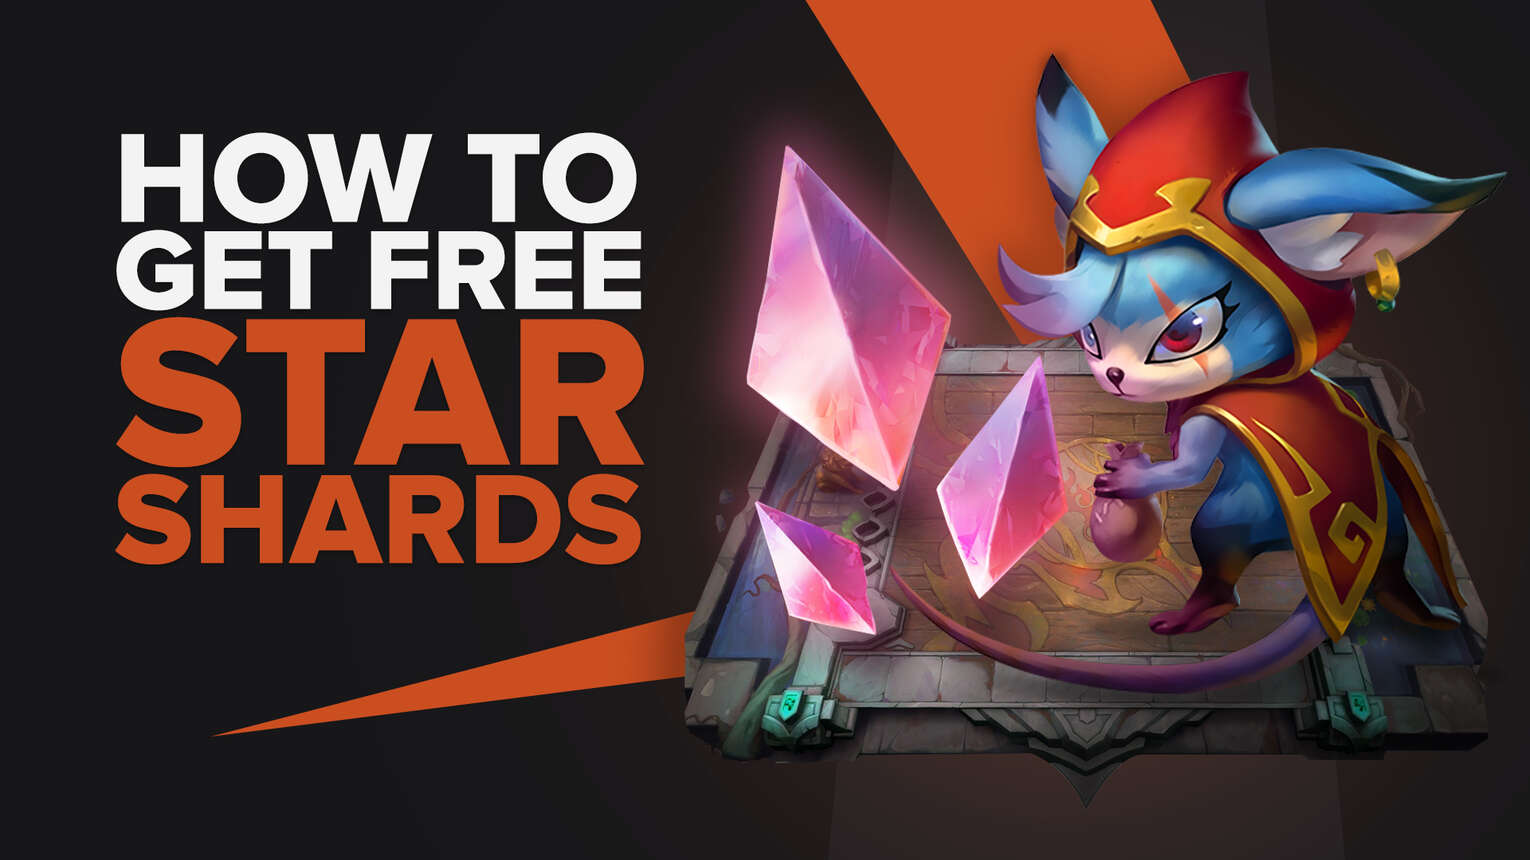 How To Get Free Star Shards in TFT League Of Legends